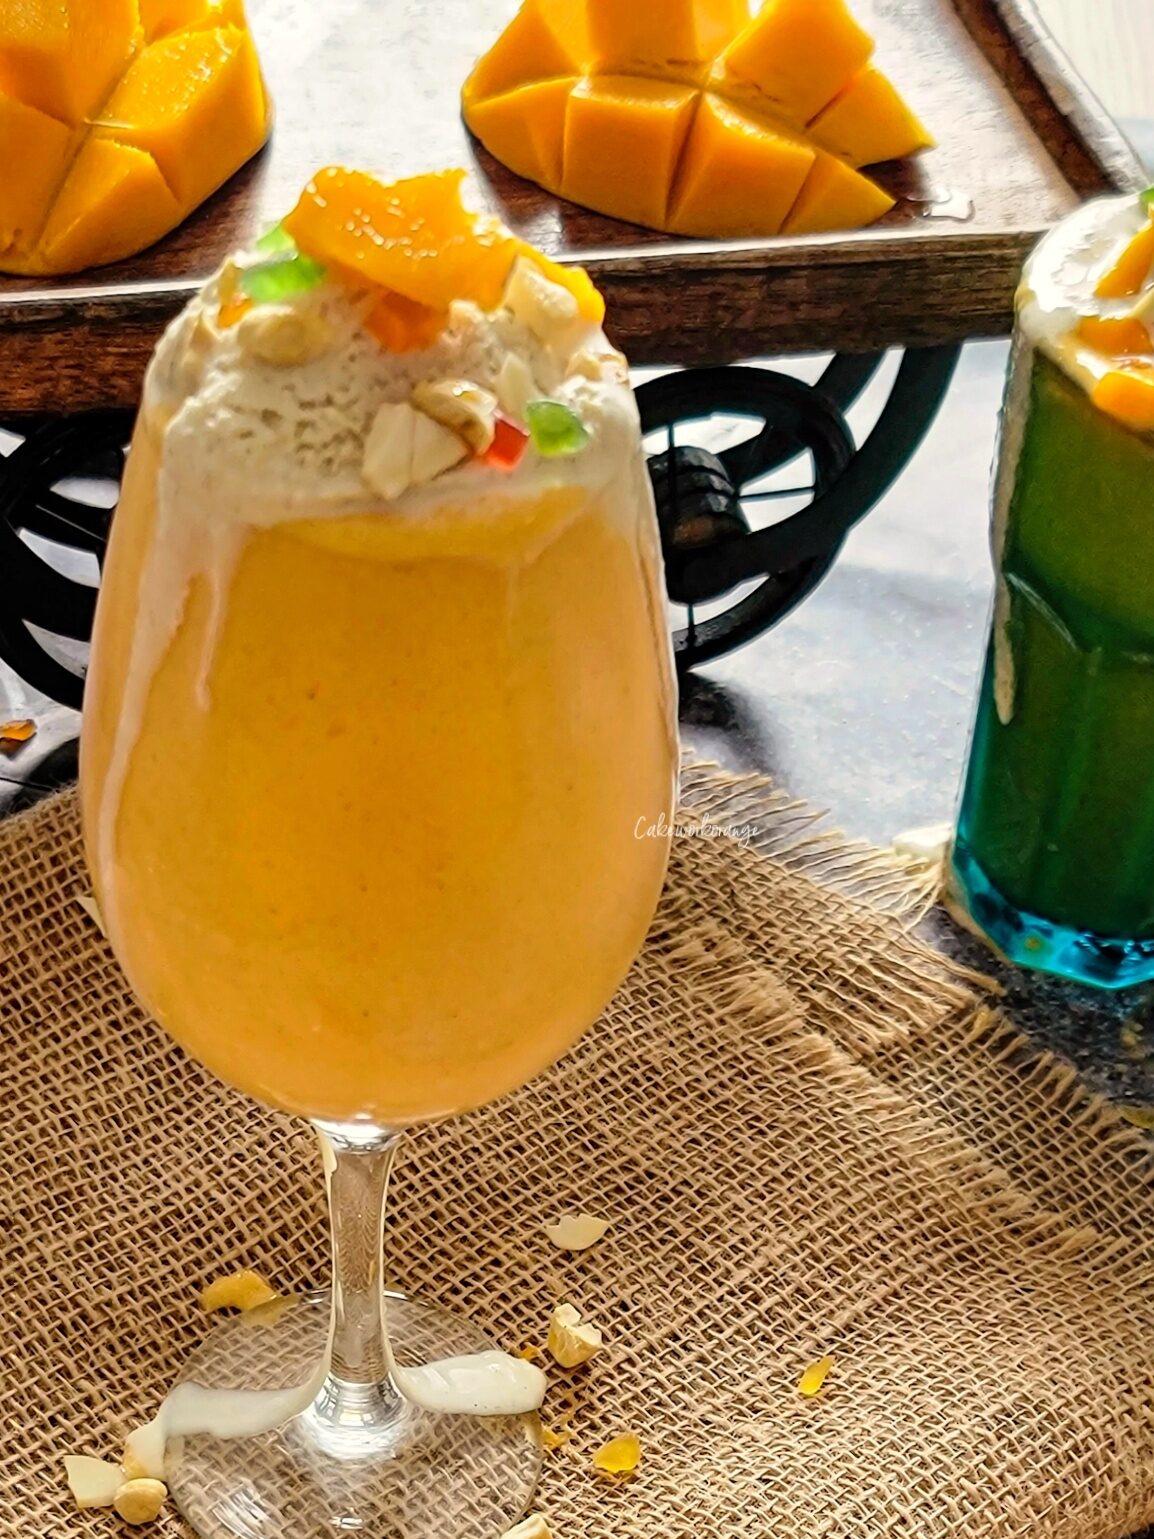 Mango Mastani is a rich and delicious summer drink, that originated in India. It is nothing but a thick mango milkshake topped with ice cream, nuts and cut mango pieces. 